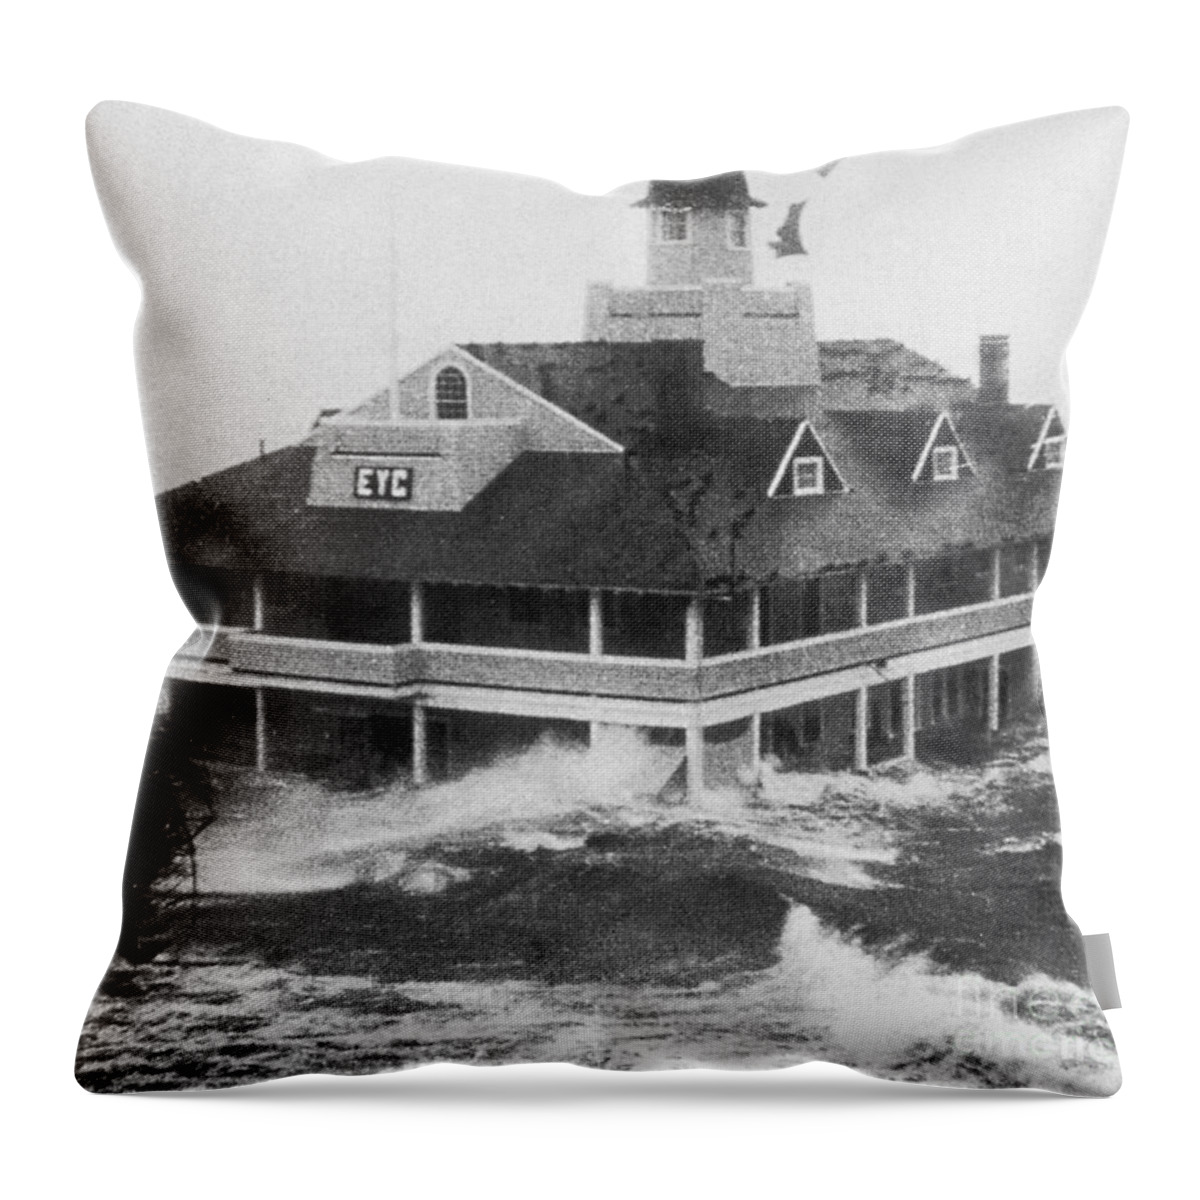 1954 Hurricane Throw Pillow featuring the photograph Hurricane Carol by Science Source